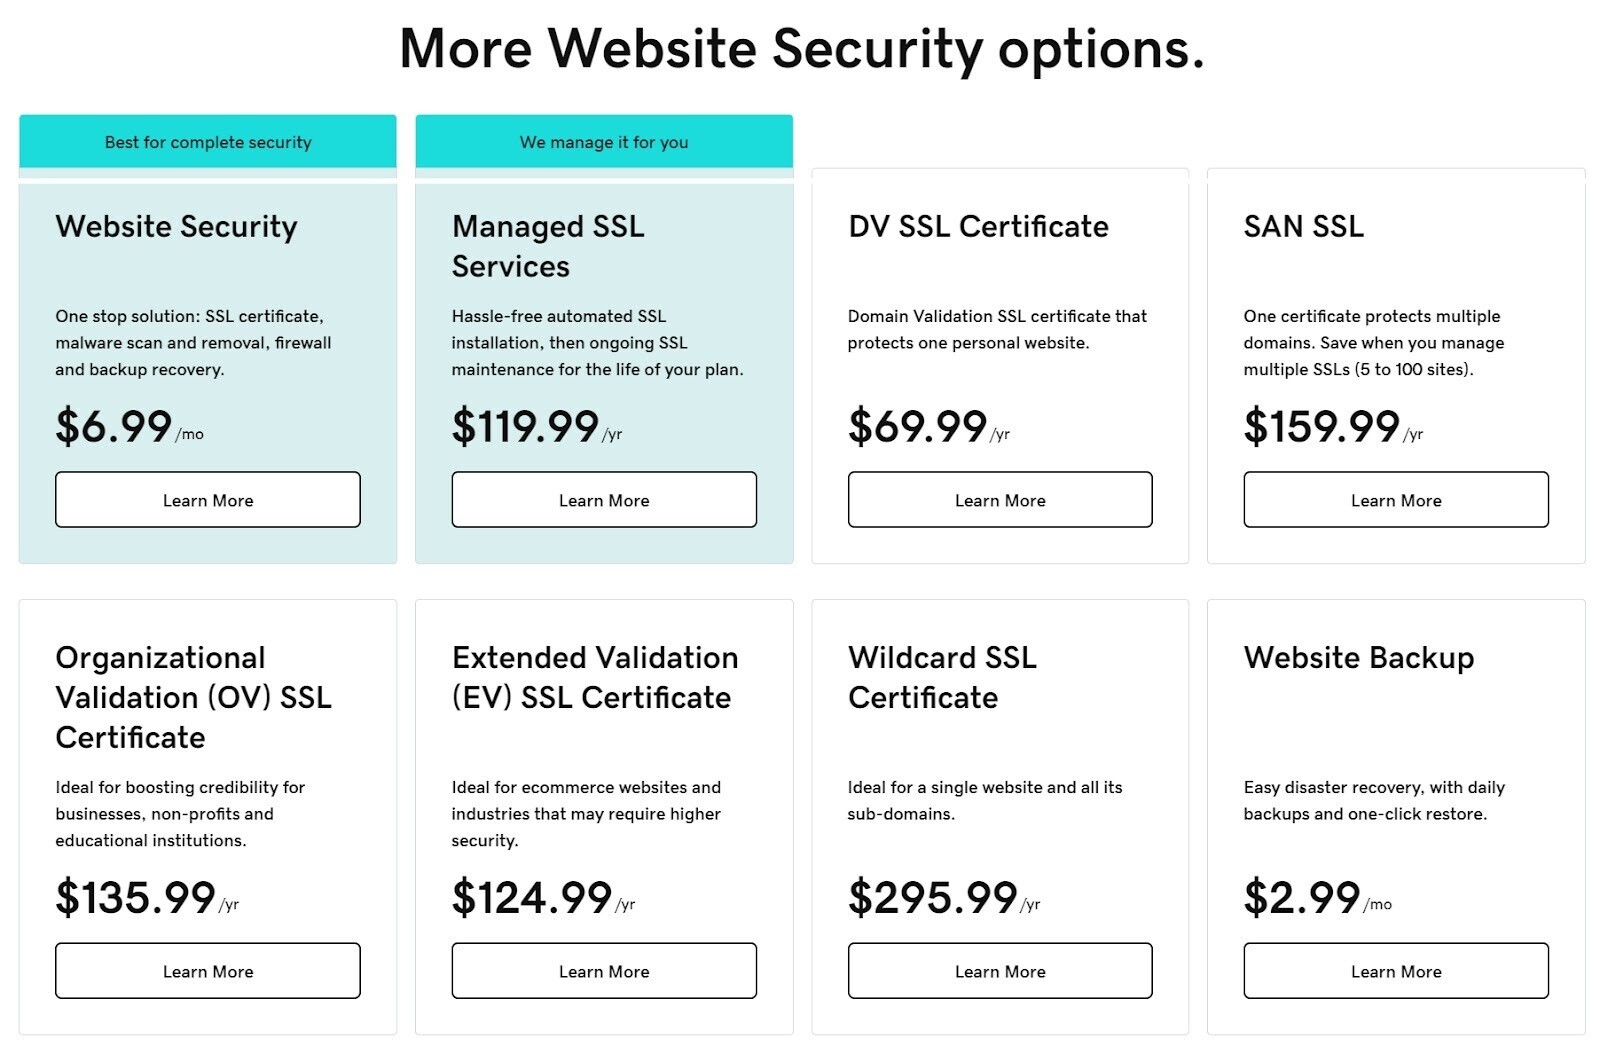 GoDaddy's "More Website Security options." page